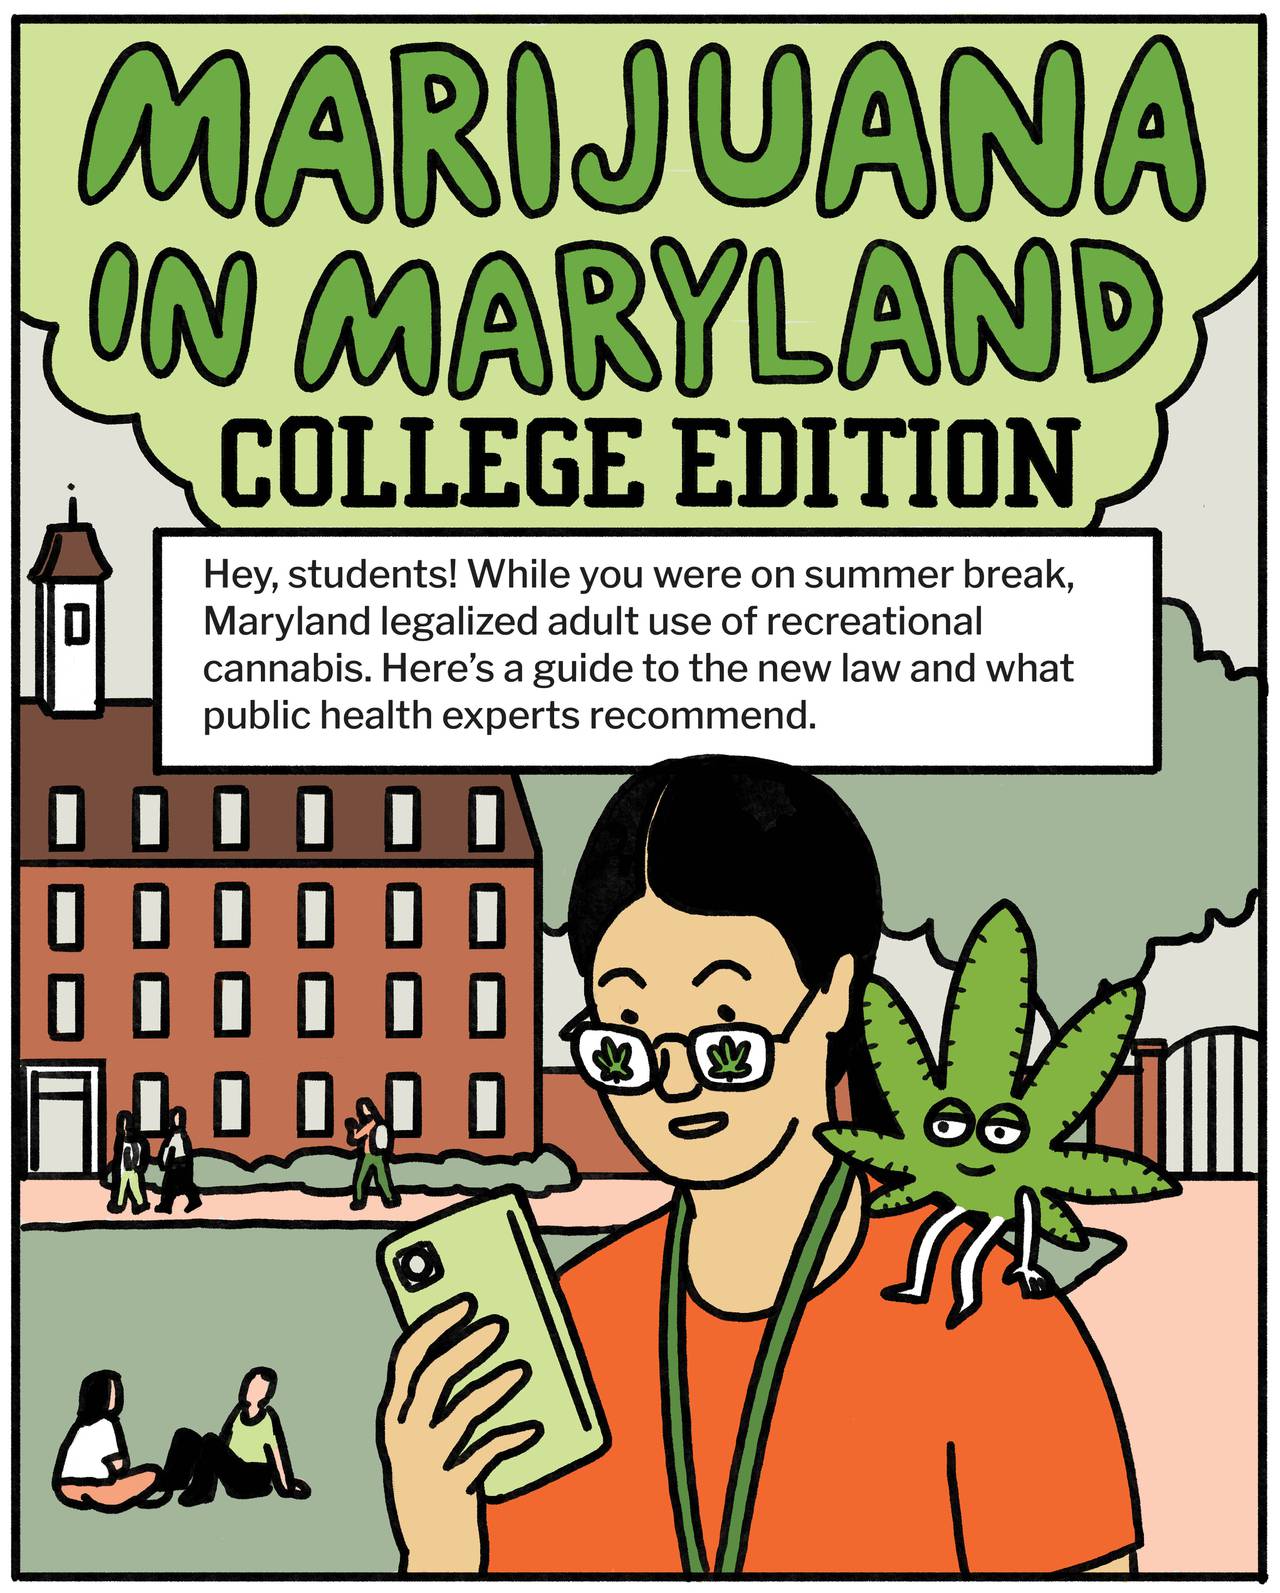 Marijuana in Maryland: college edition. Hey, students! While you were on summer break, Maryland legalized adult recreational use of cannabis. Here’s a guide to the new law and what public health experts recommend.